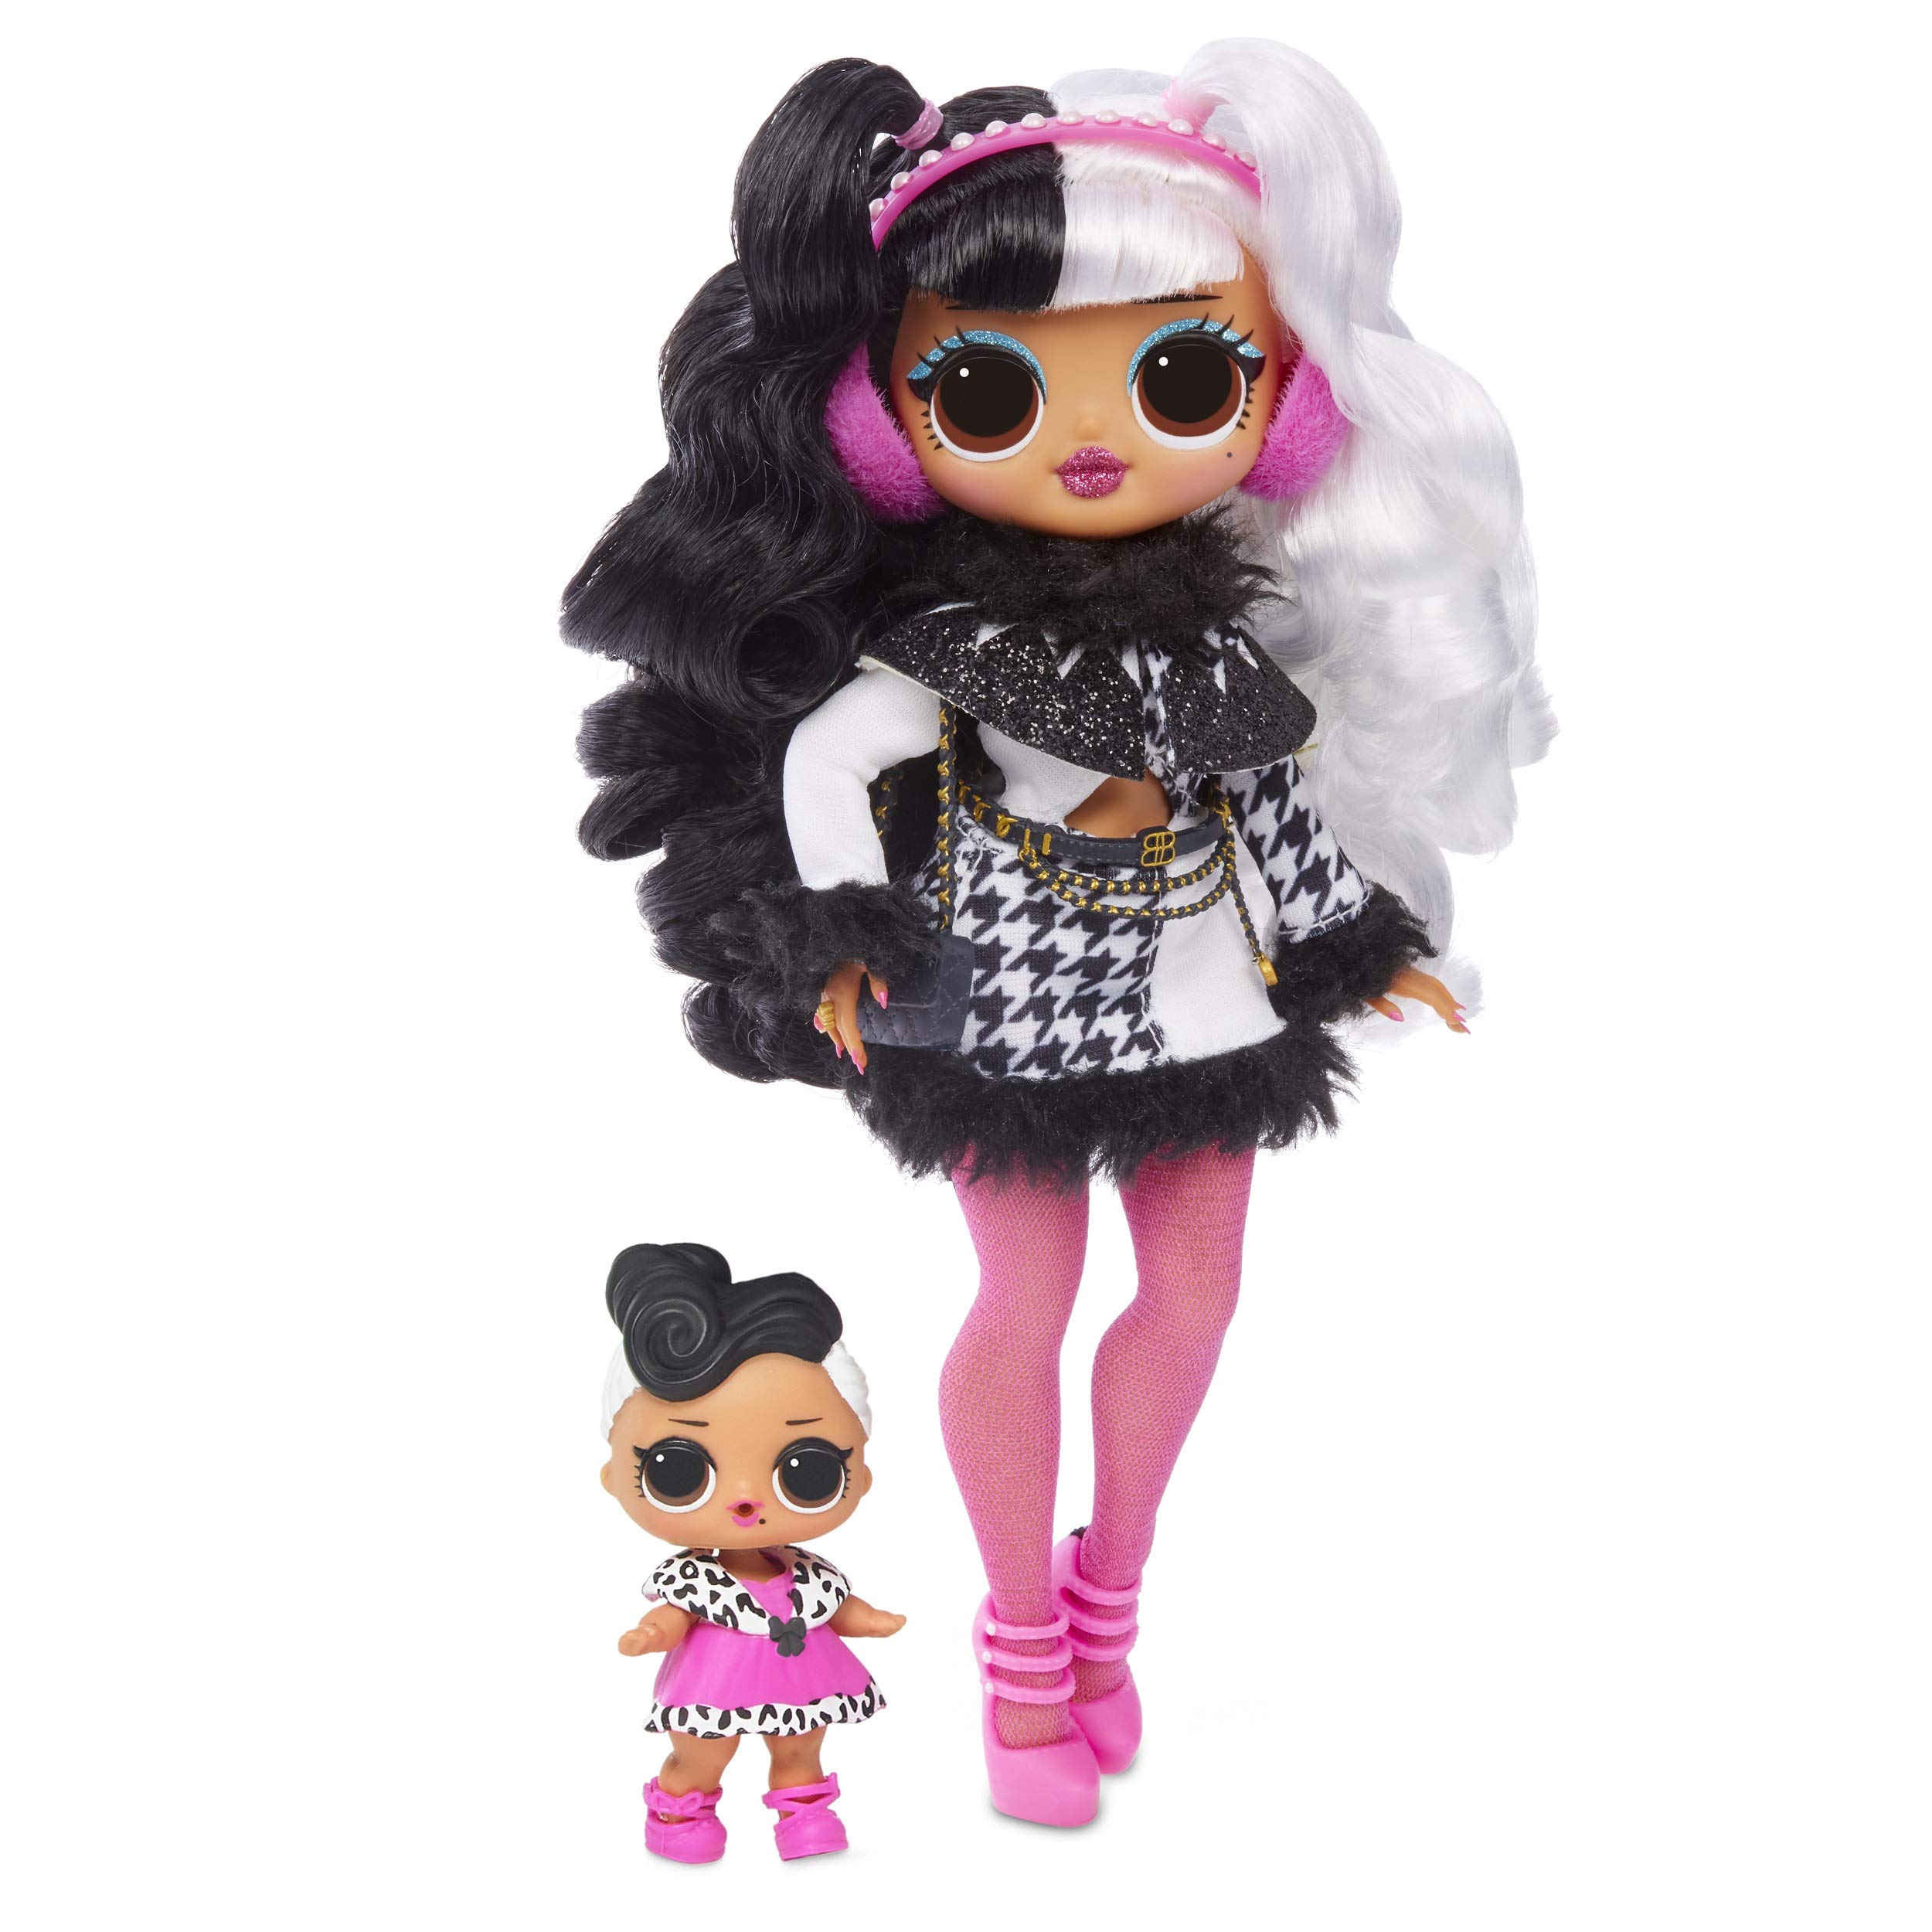 LOL Surprise OMG Winter Disco Series With Exclusive Dollie Fashion Doll And 25 Surprises Including Her Little Sister Dollface, Fashions, Shoes, Purse, Fur Shawl, Ear Muffs And More | Kids Ages 6-10